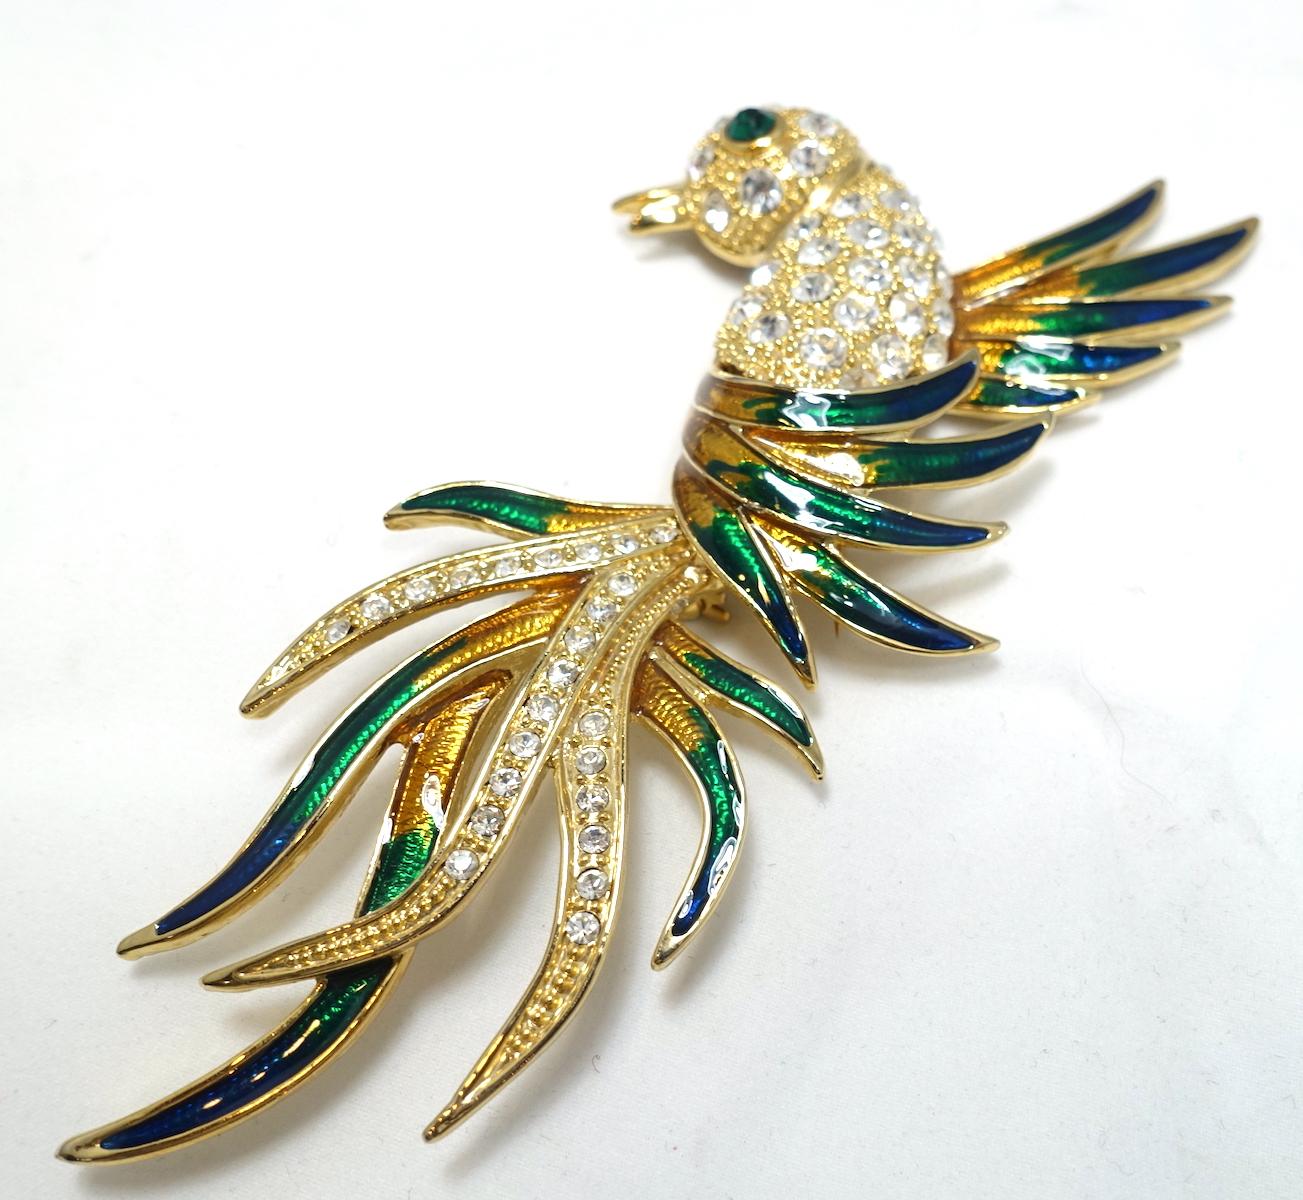 This huge bird brooch has a clear crystal body.  The wings have green and gold enameling in a gold tone setting.  In excellent condition, this brooch measures 5-3/4” x 2-3/4”.